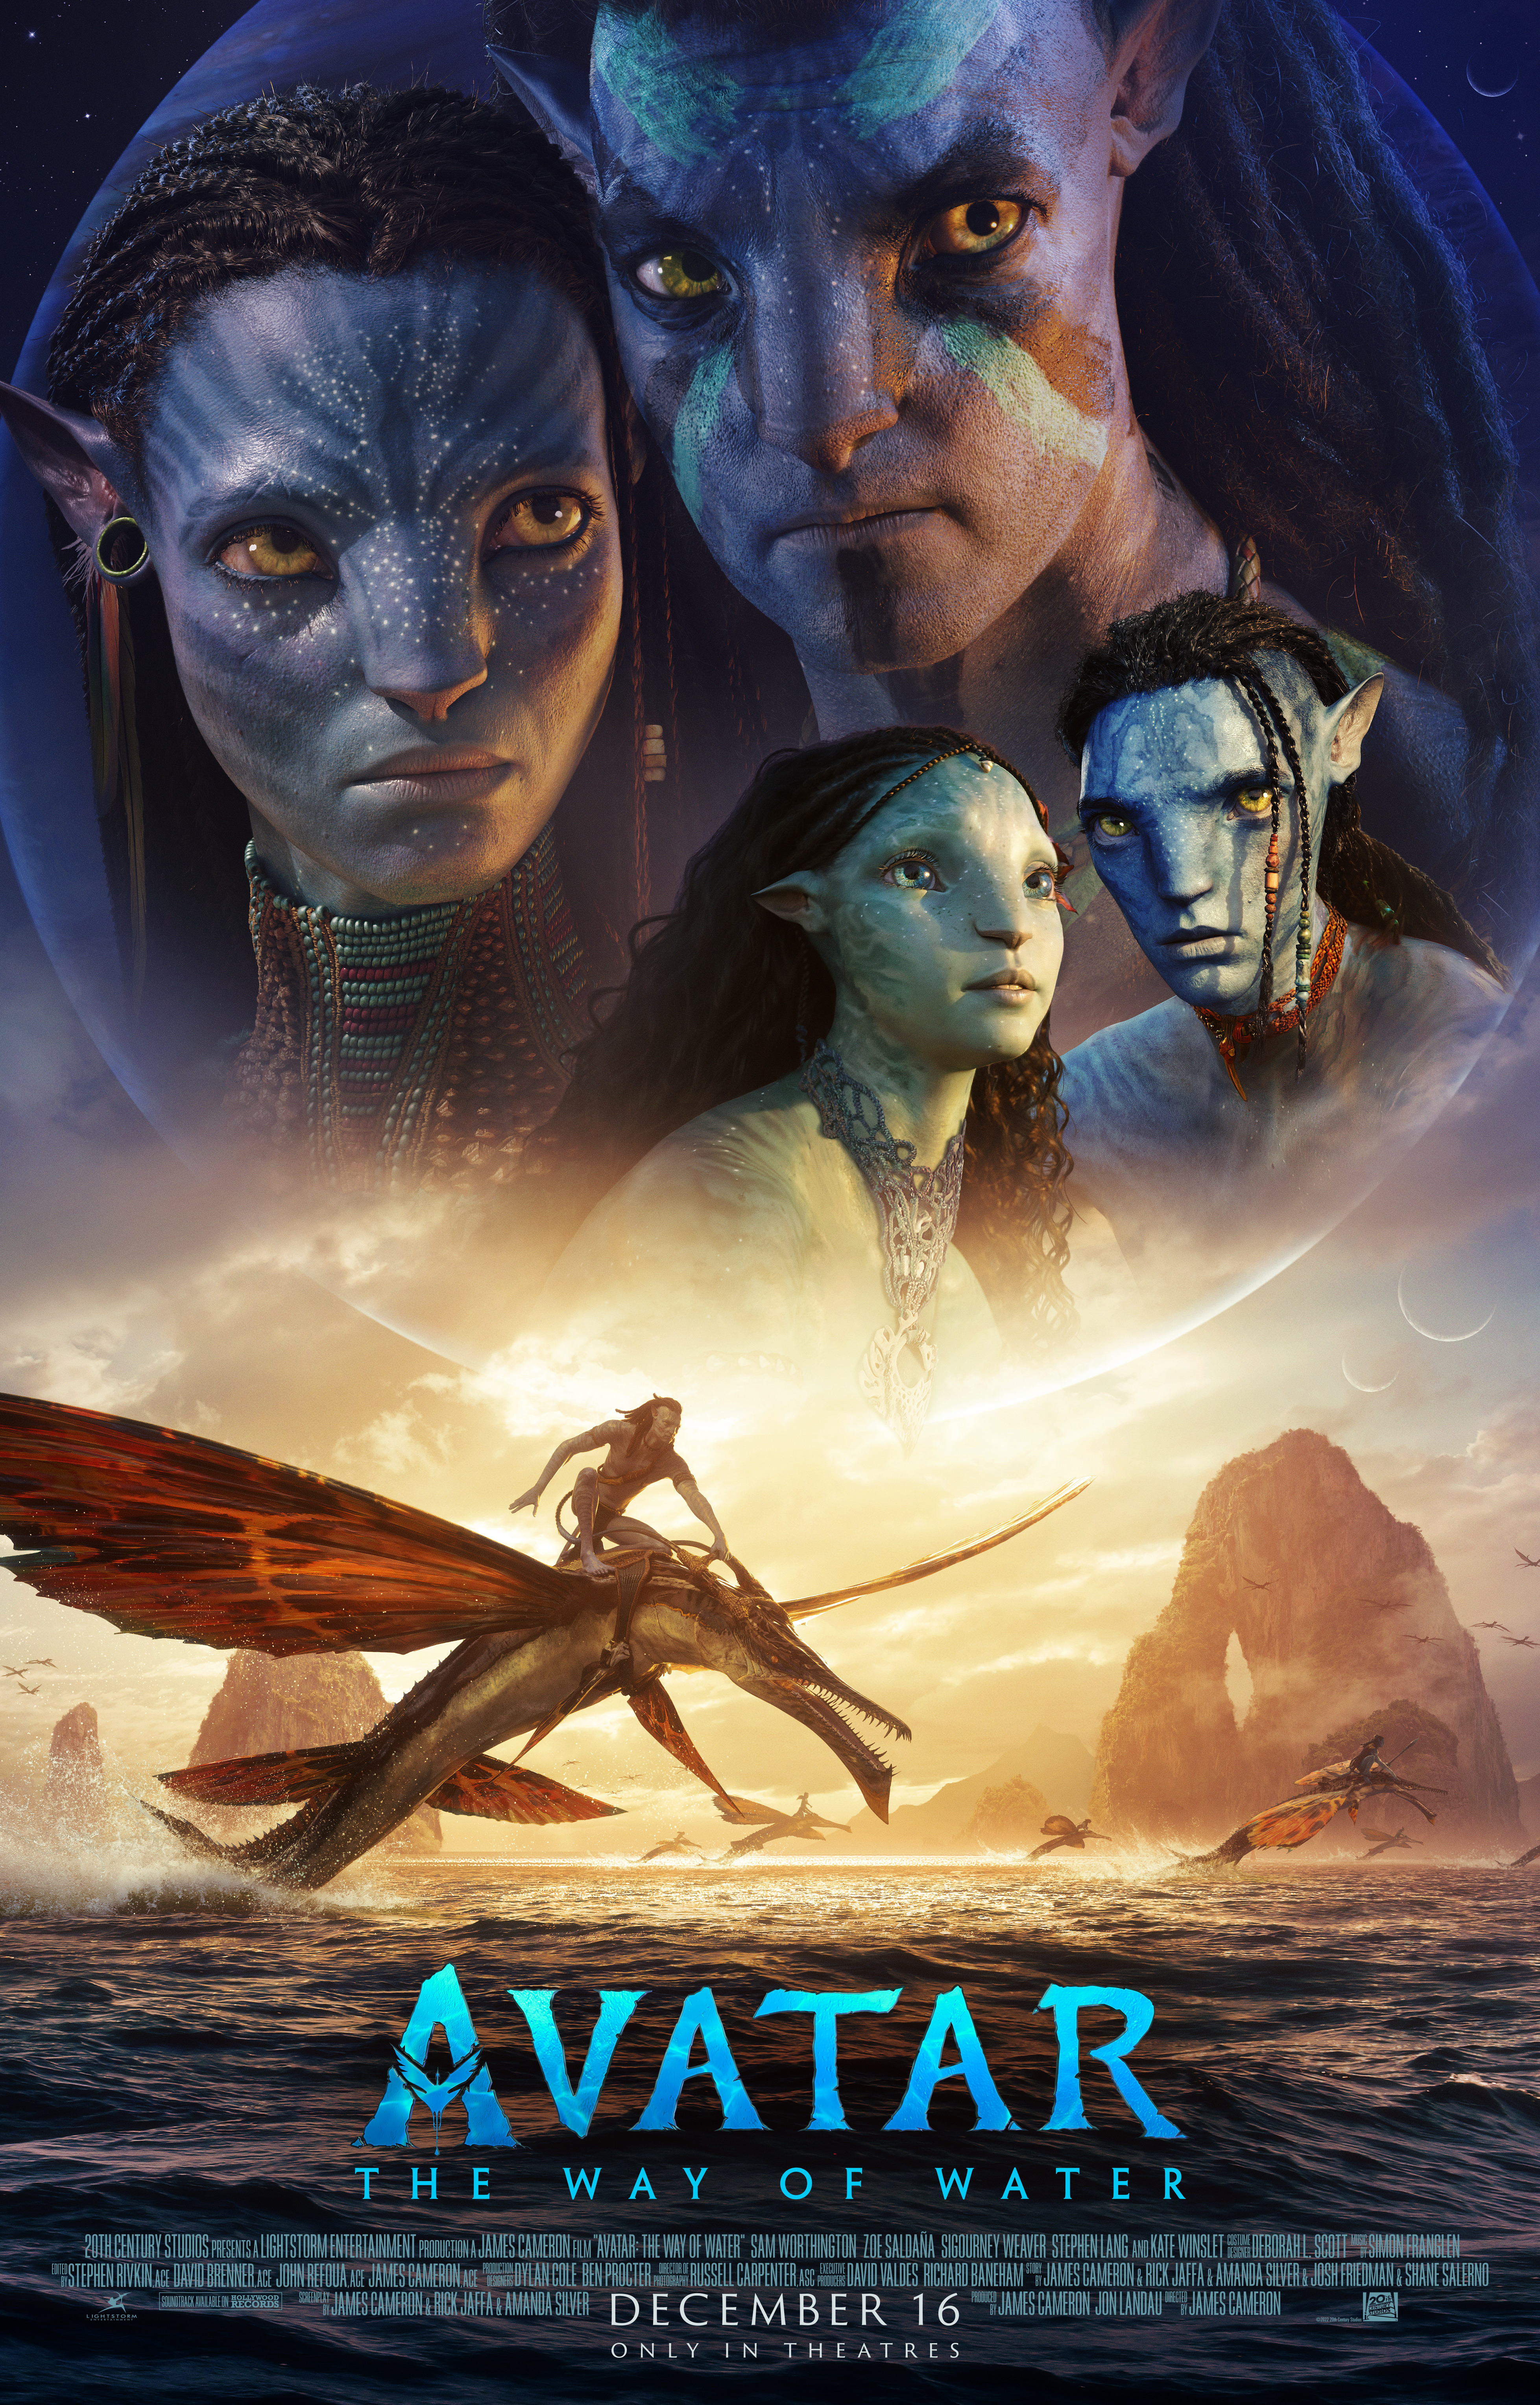 Avatar The Way of Water Is Out on Digital Release and VOD